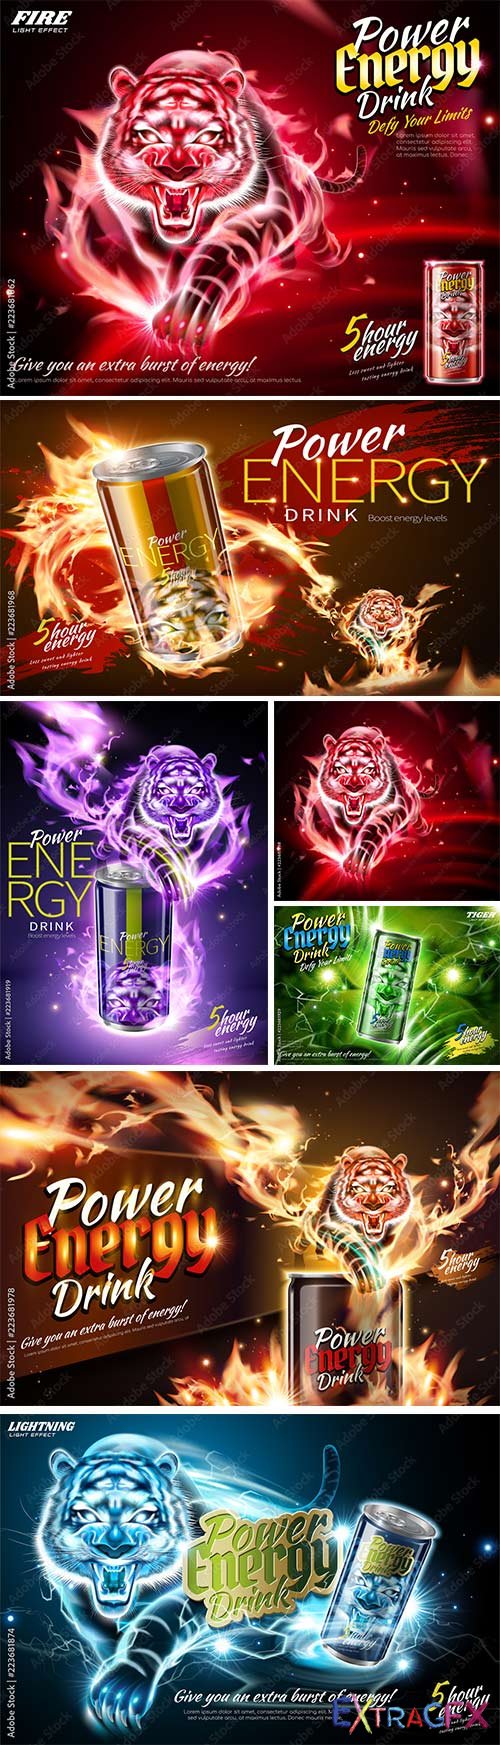 Tiger with red burning flame, power energy drink ads vector